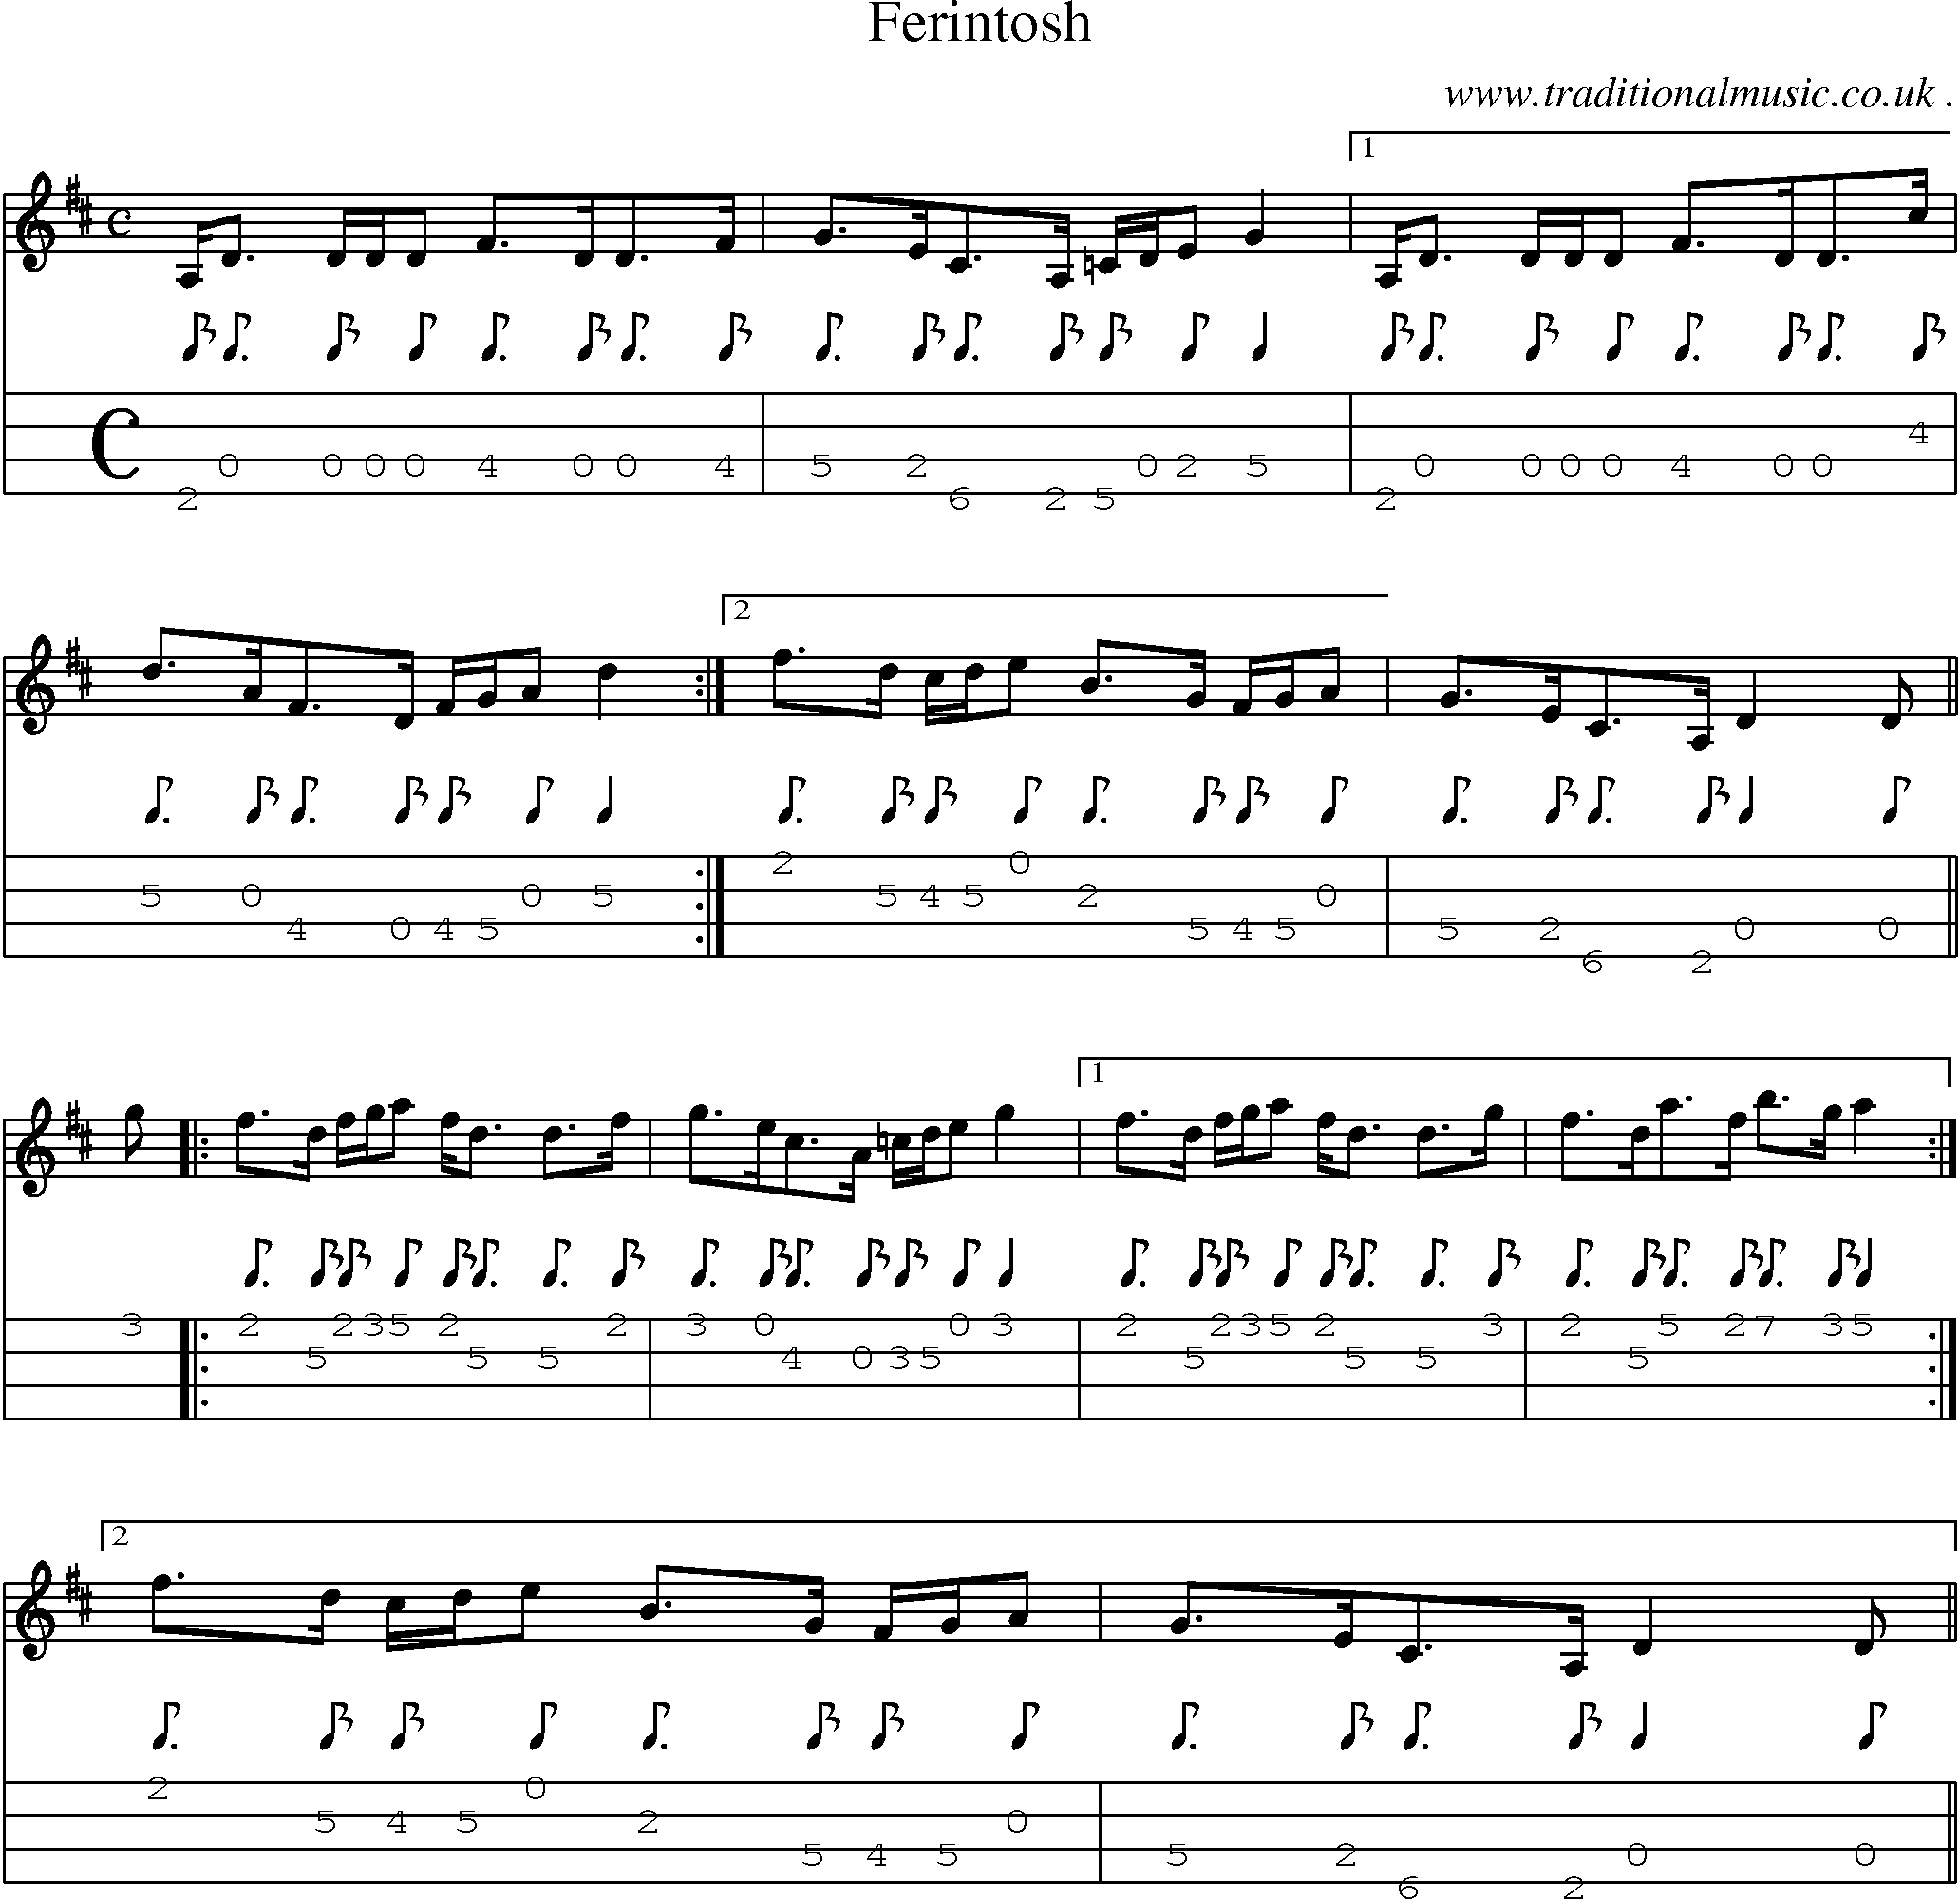 Sheet-music  score, Chords and Mandolin Tabs for Ferintosh